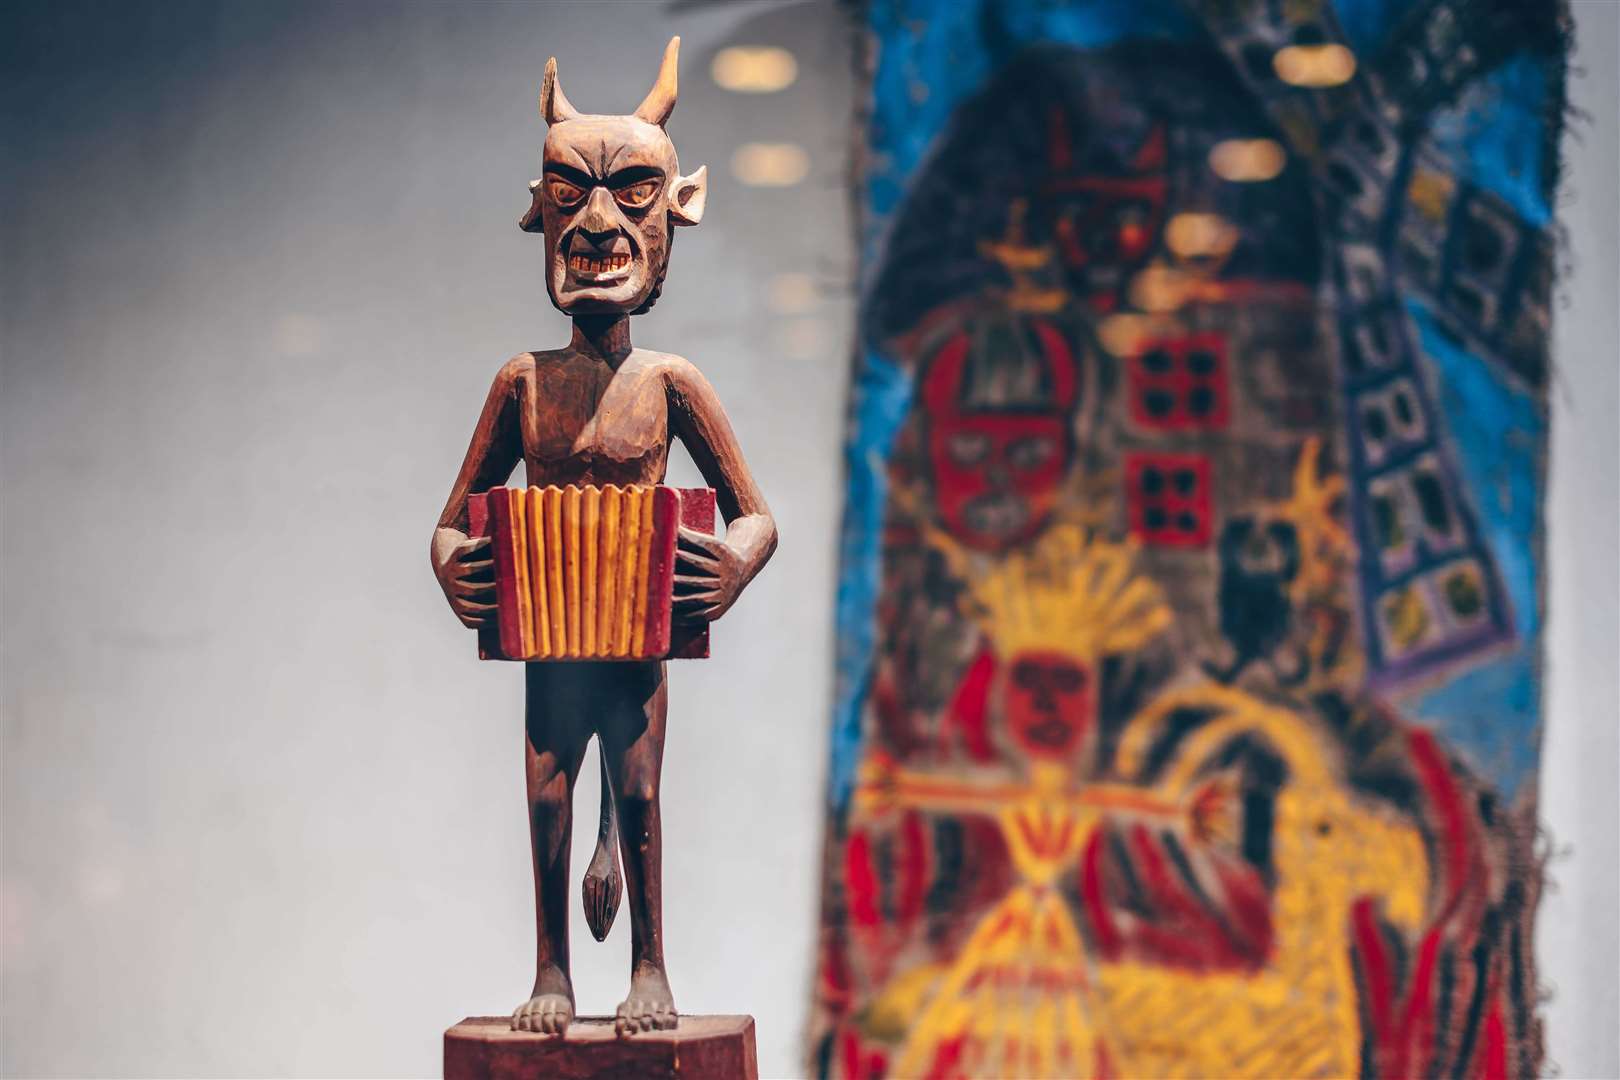 Quirky statue in the world's only devil museum. Pictures: A Aleksandravicius